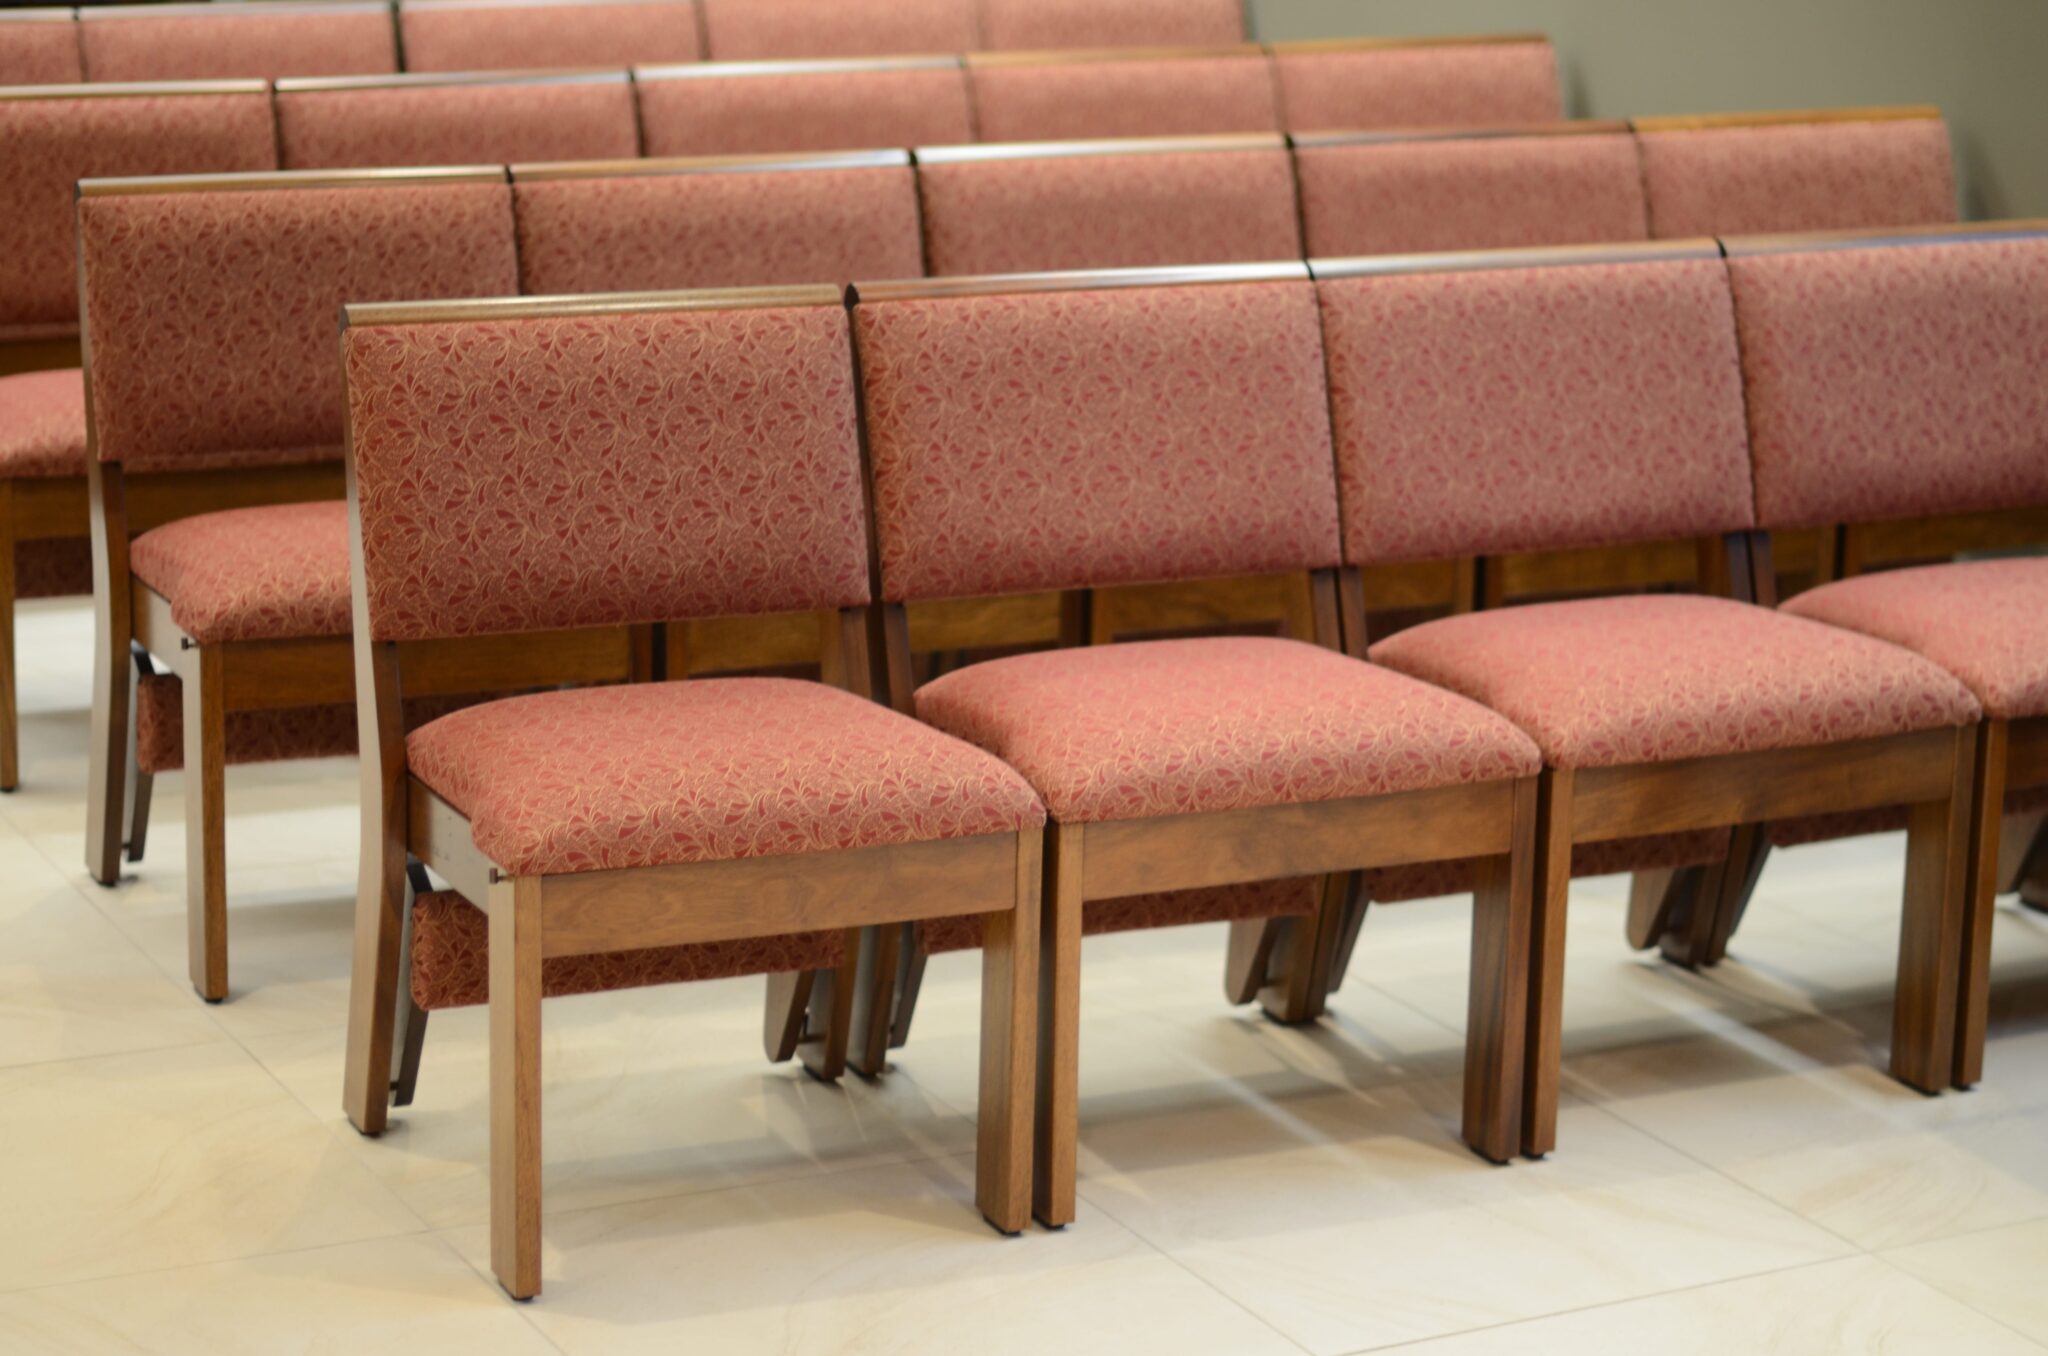 Stackable Wood Chairs New Holland Church Furniture